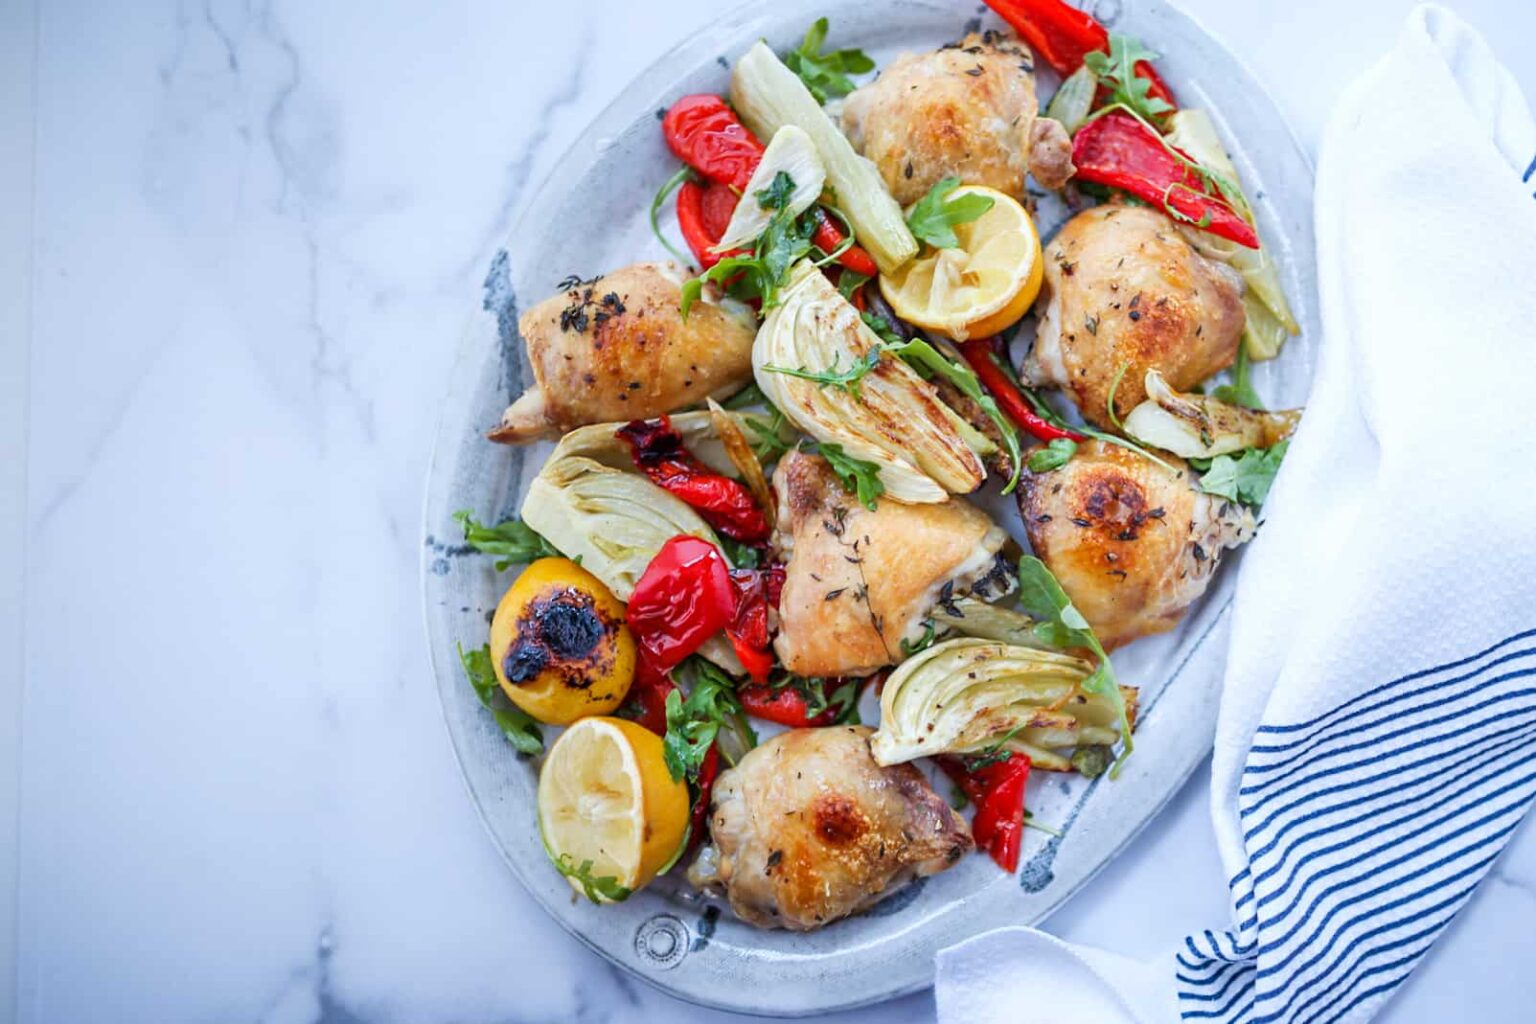 Sheetpan Chicken thighs with Fennel and Red pepper - Joy in the Meantime